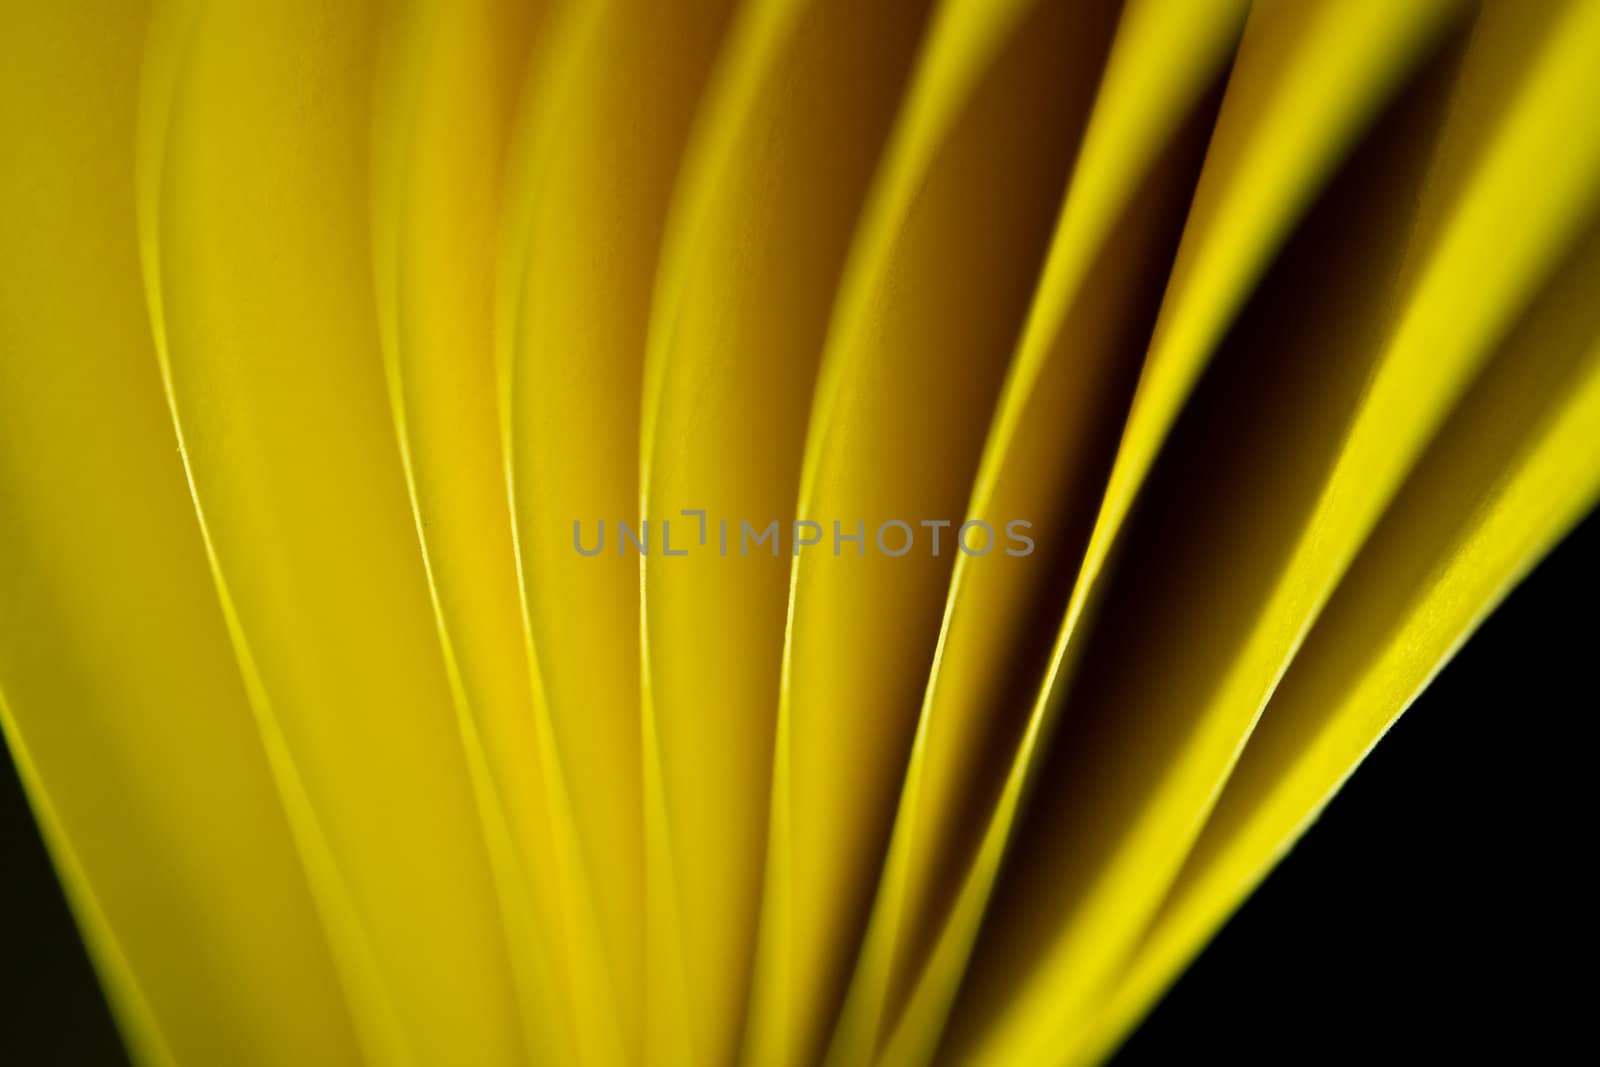 Yellow A4 paper illuminated by LED lights and twisted with black background